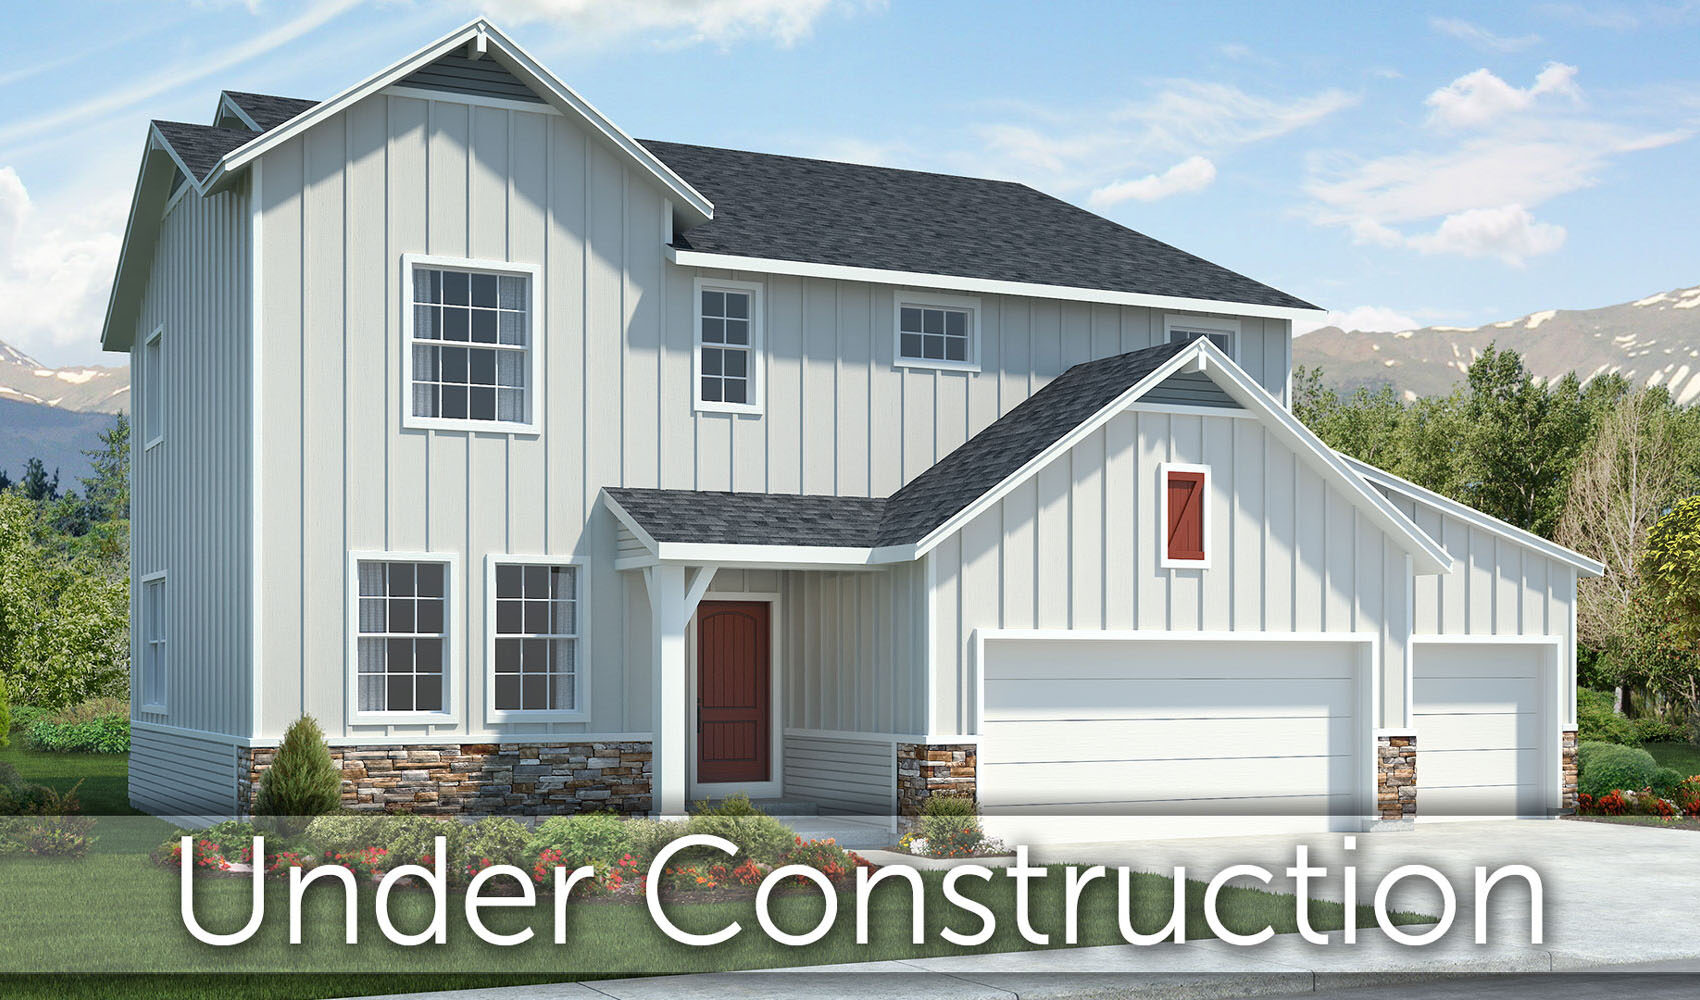 Rendering of home under construction